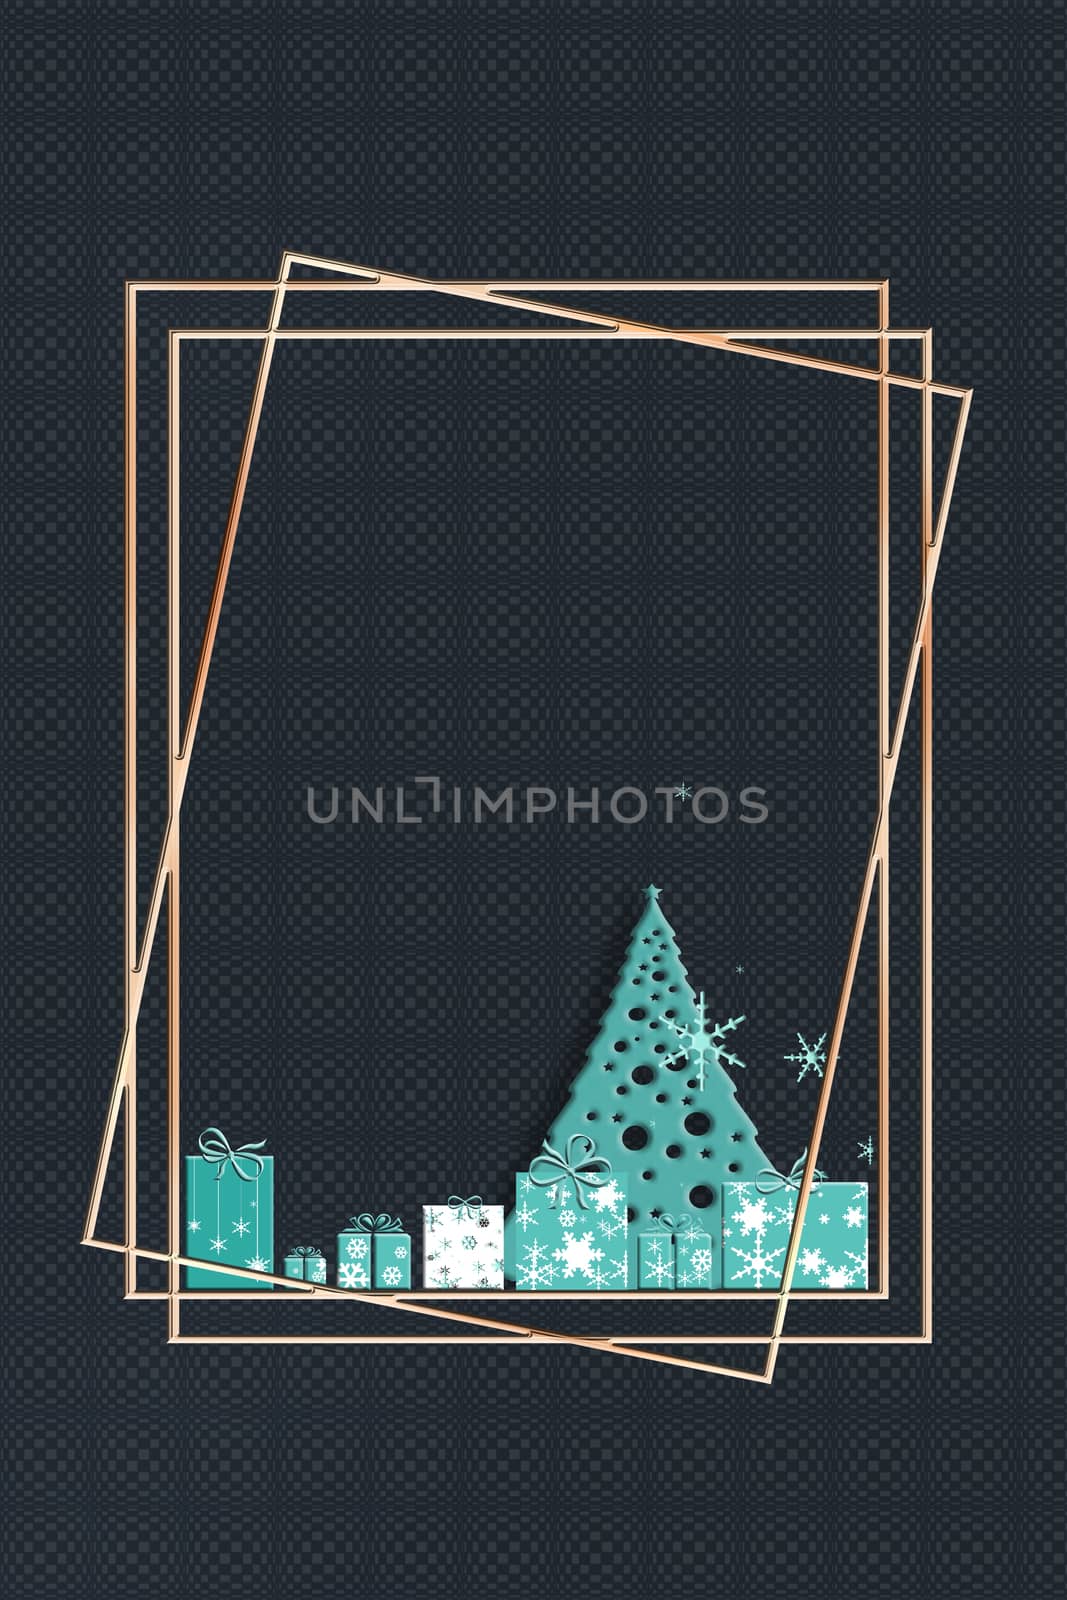 Elegant Christmas background with abstract gift boxes made from turquoise blue snowflakes, Christmas tree and text Merry Christmas on white background. Copy space, 3D illustartion